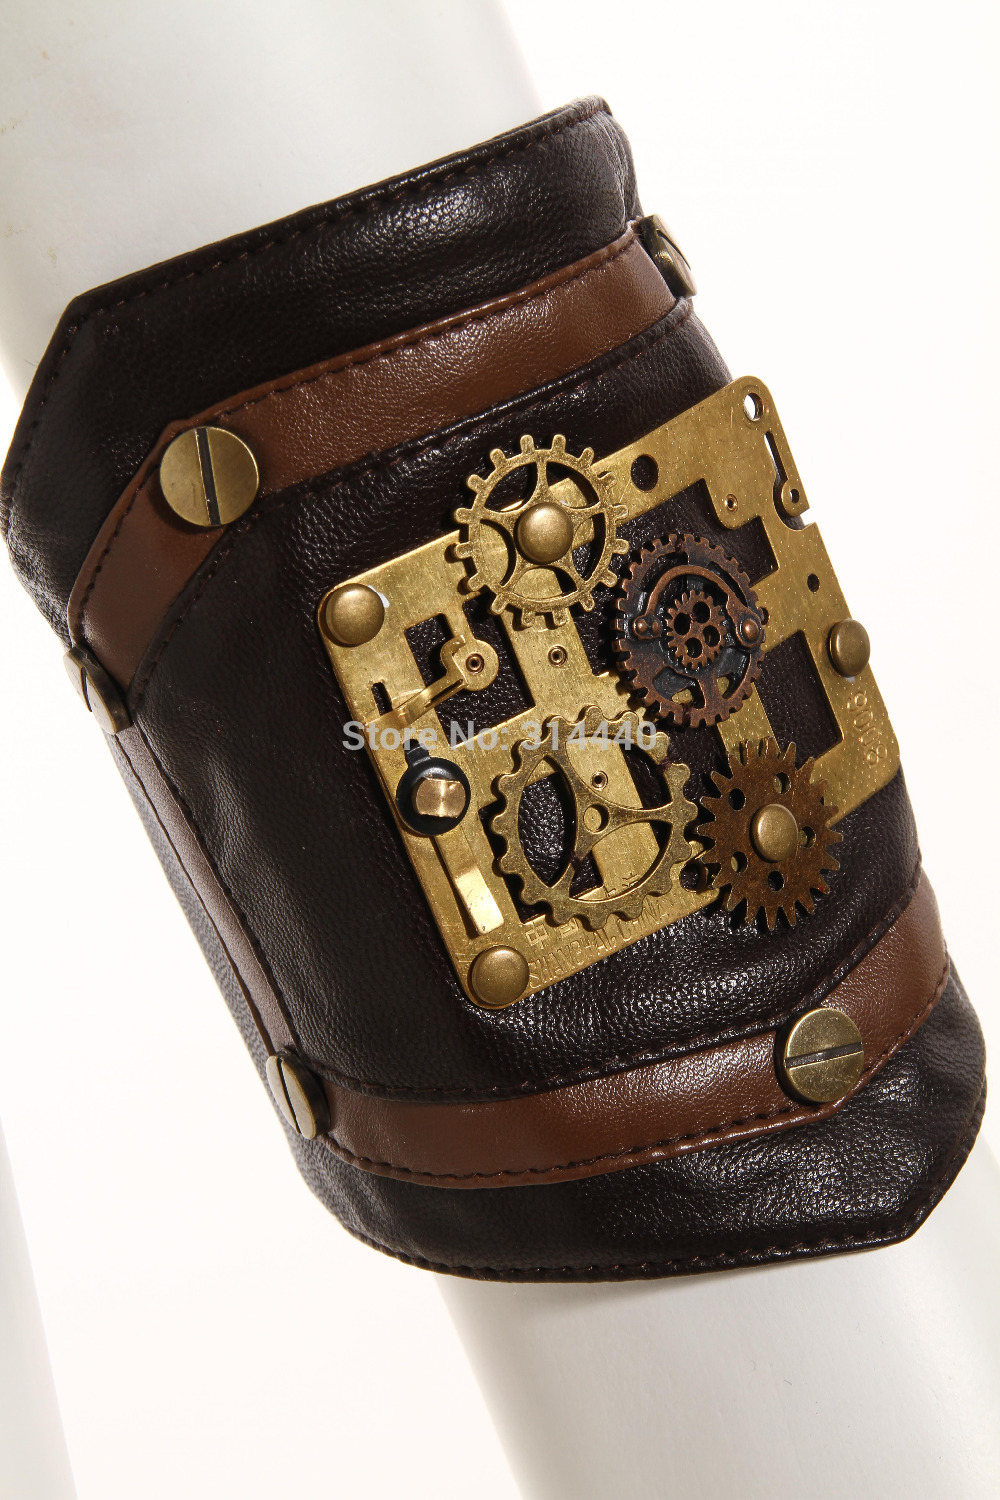 RQ-BL Unisex Steampunk arm band Faux leather gears...